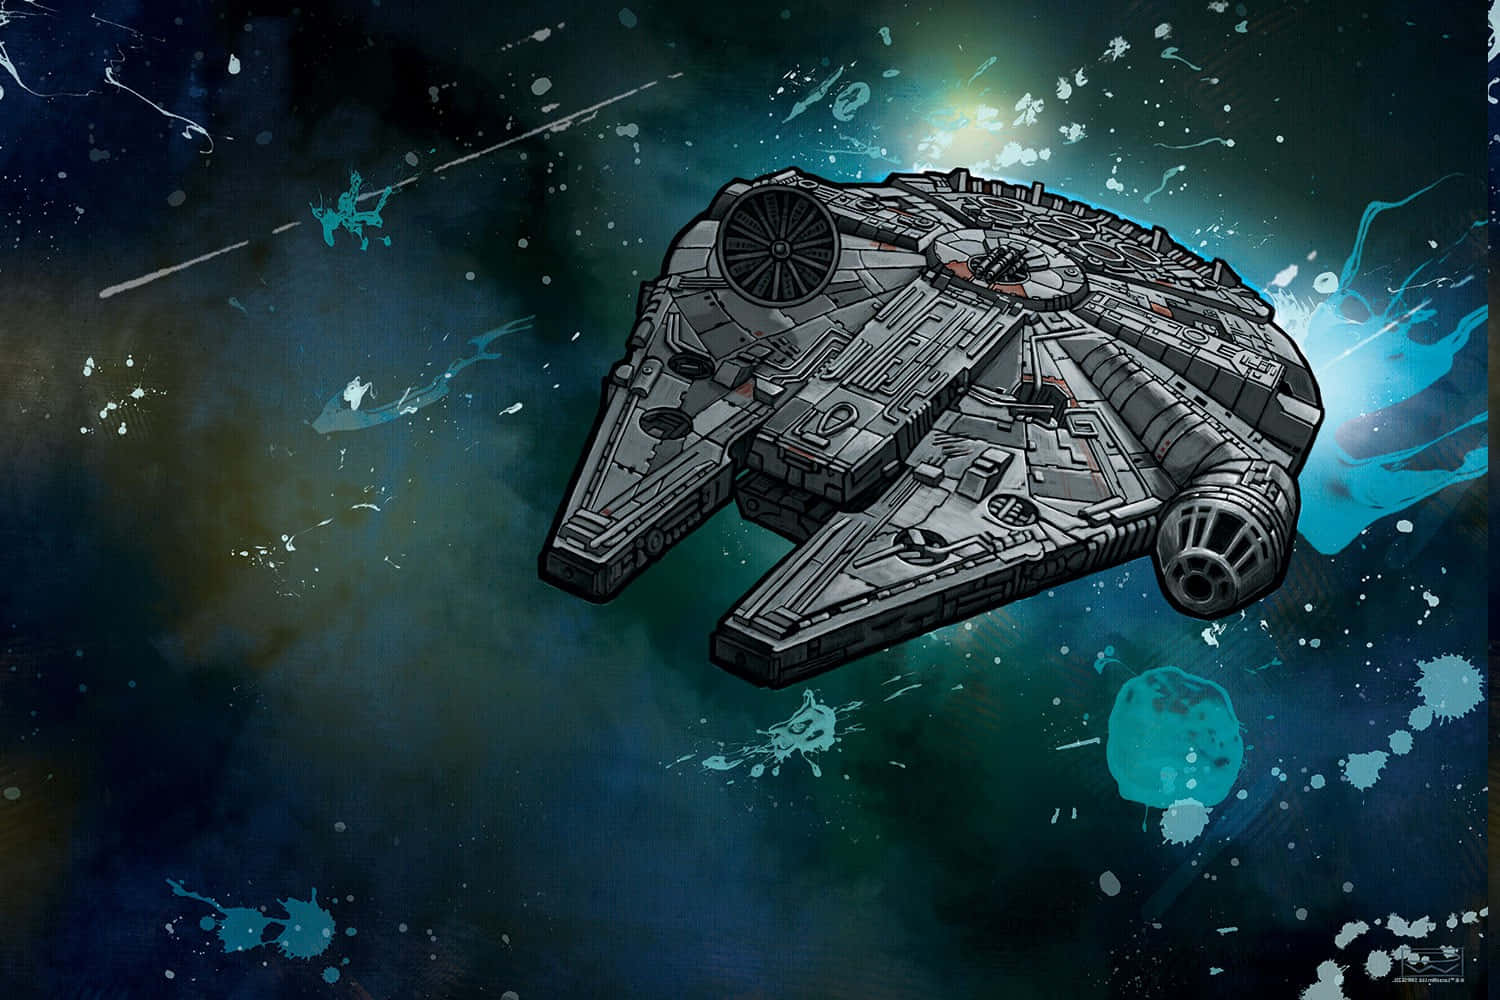 The iconic Millenium Falcon in all its glory Wallpaper